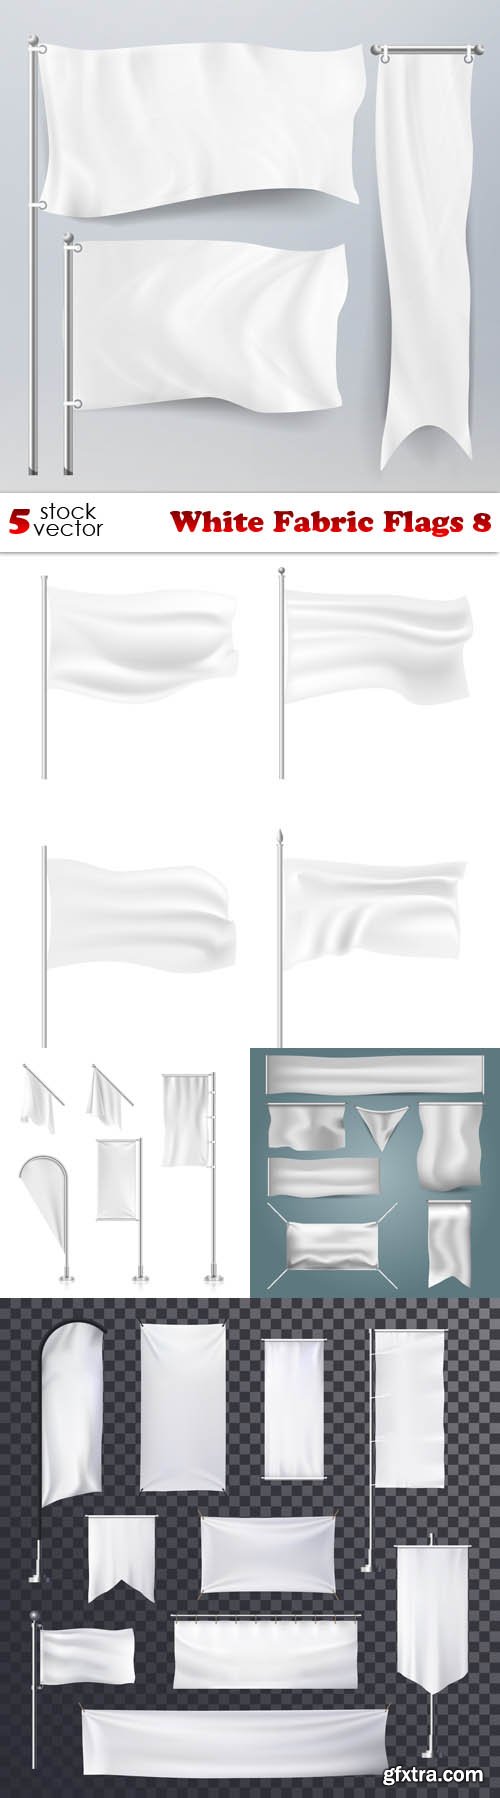 Vectors - White Fabric Flags 8